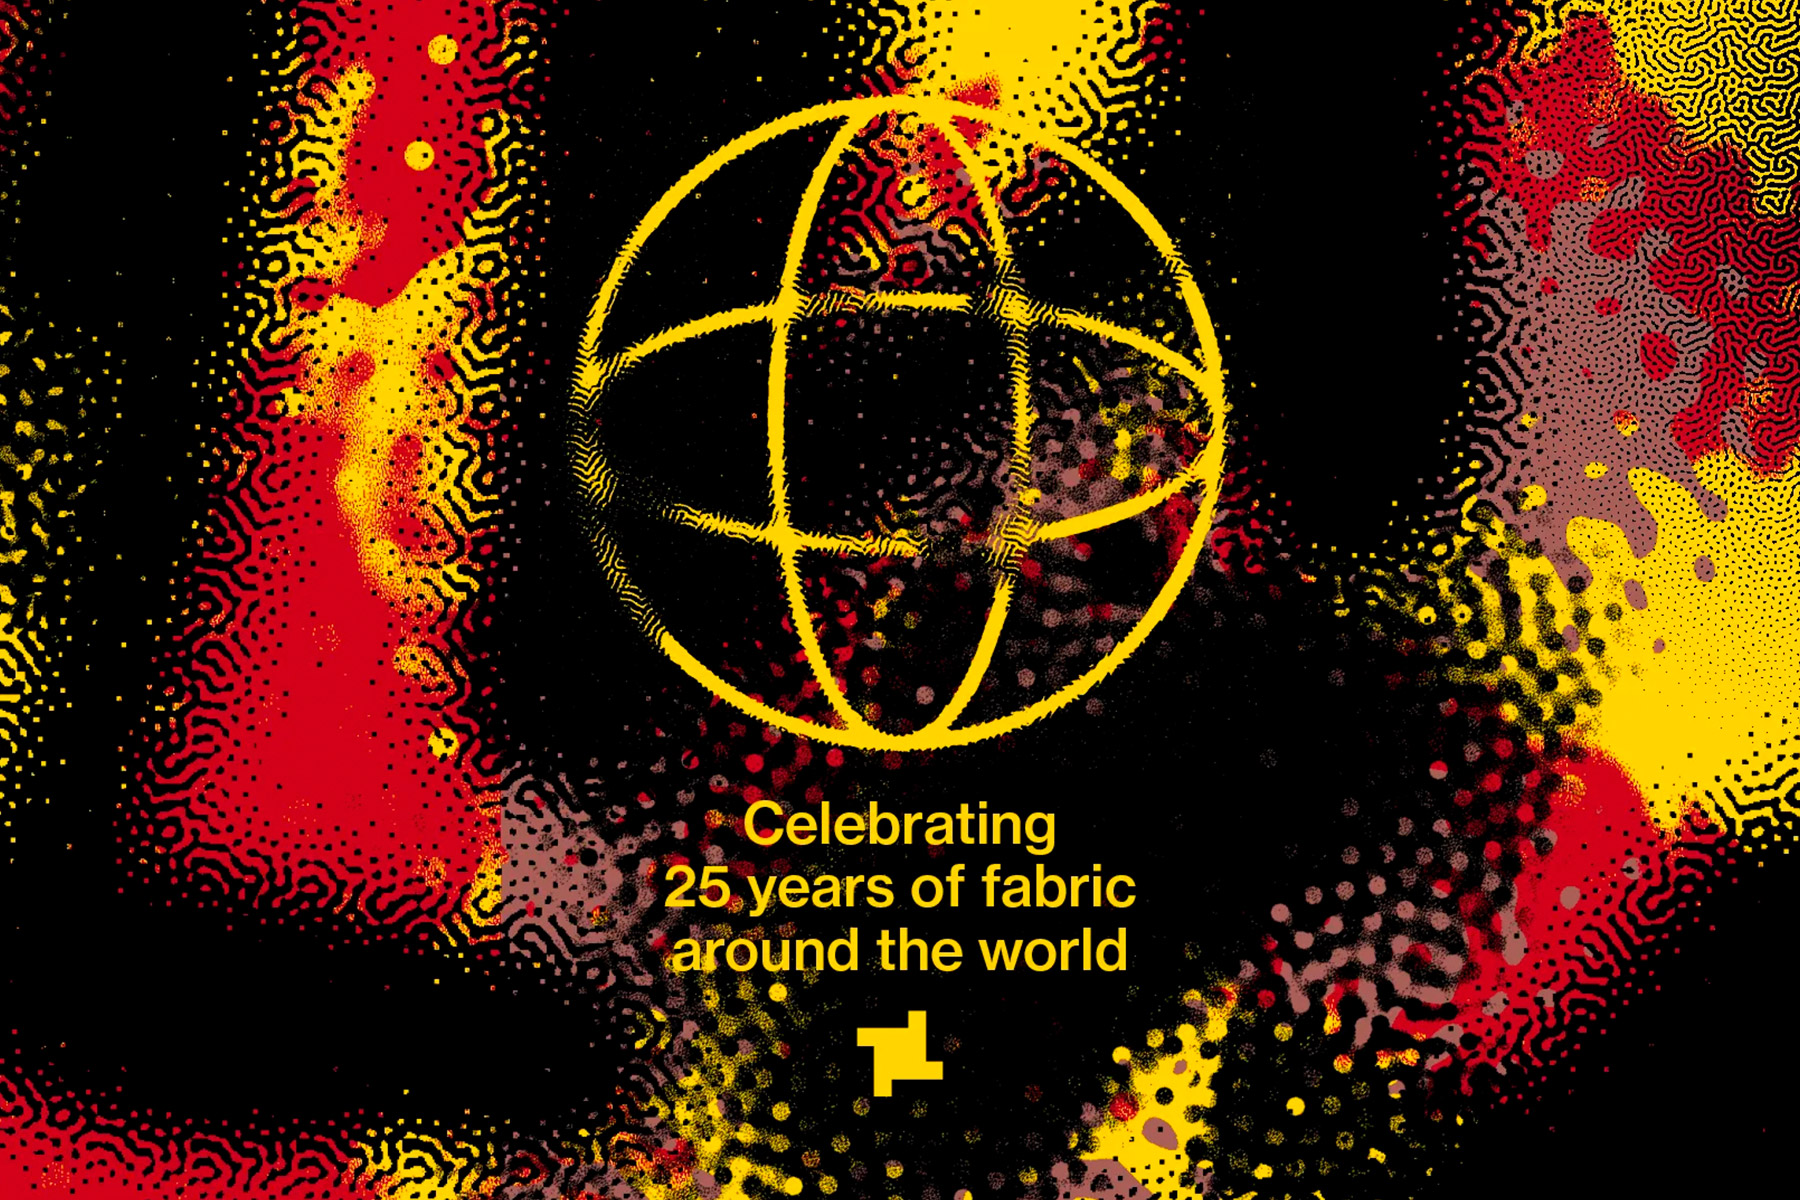 Celebrating 25 years with fabric25: Global tour phase 2 announced